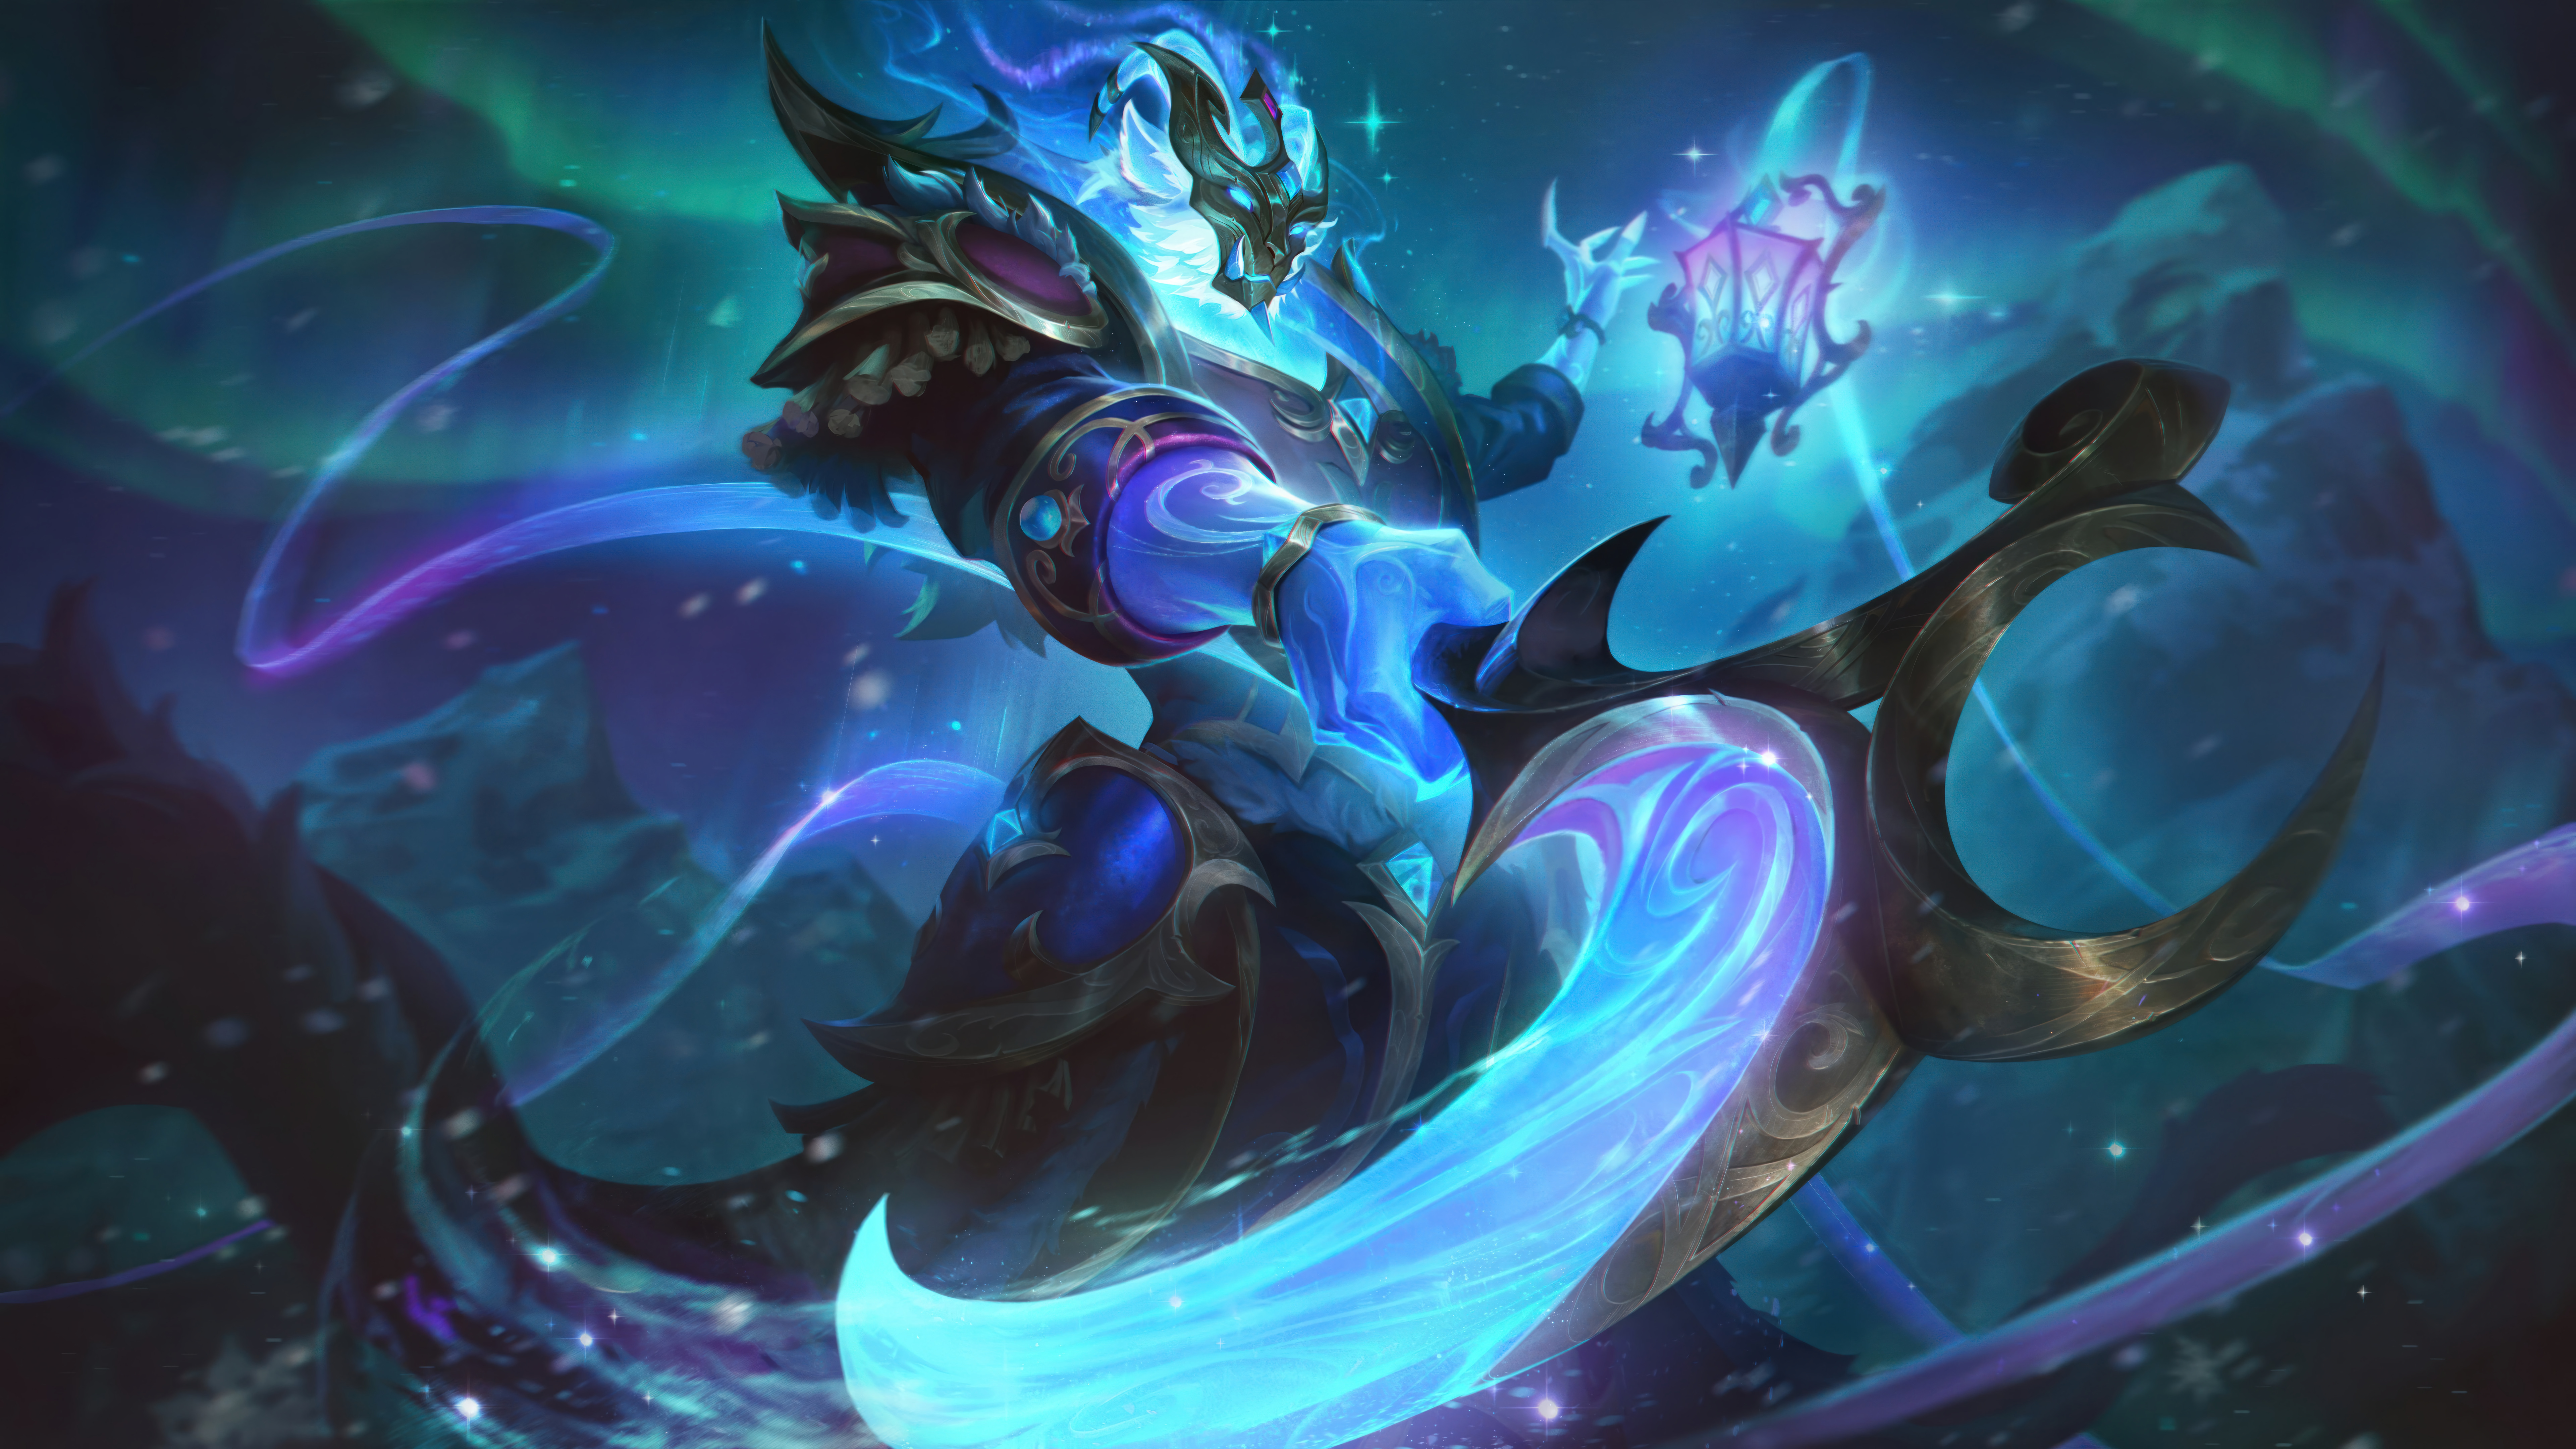 Video Games GZG Riot Games Digital Art League Of Legends Winterblessed League Of Legends Thresh Leag 7680x4320